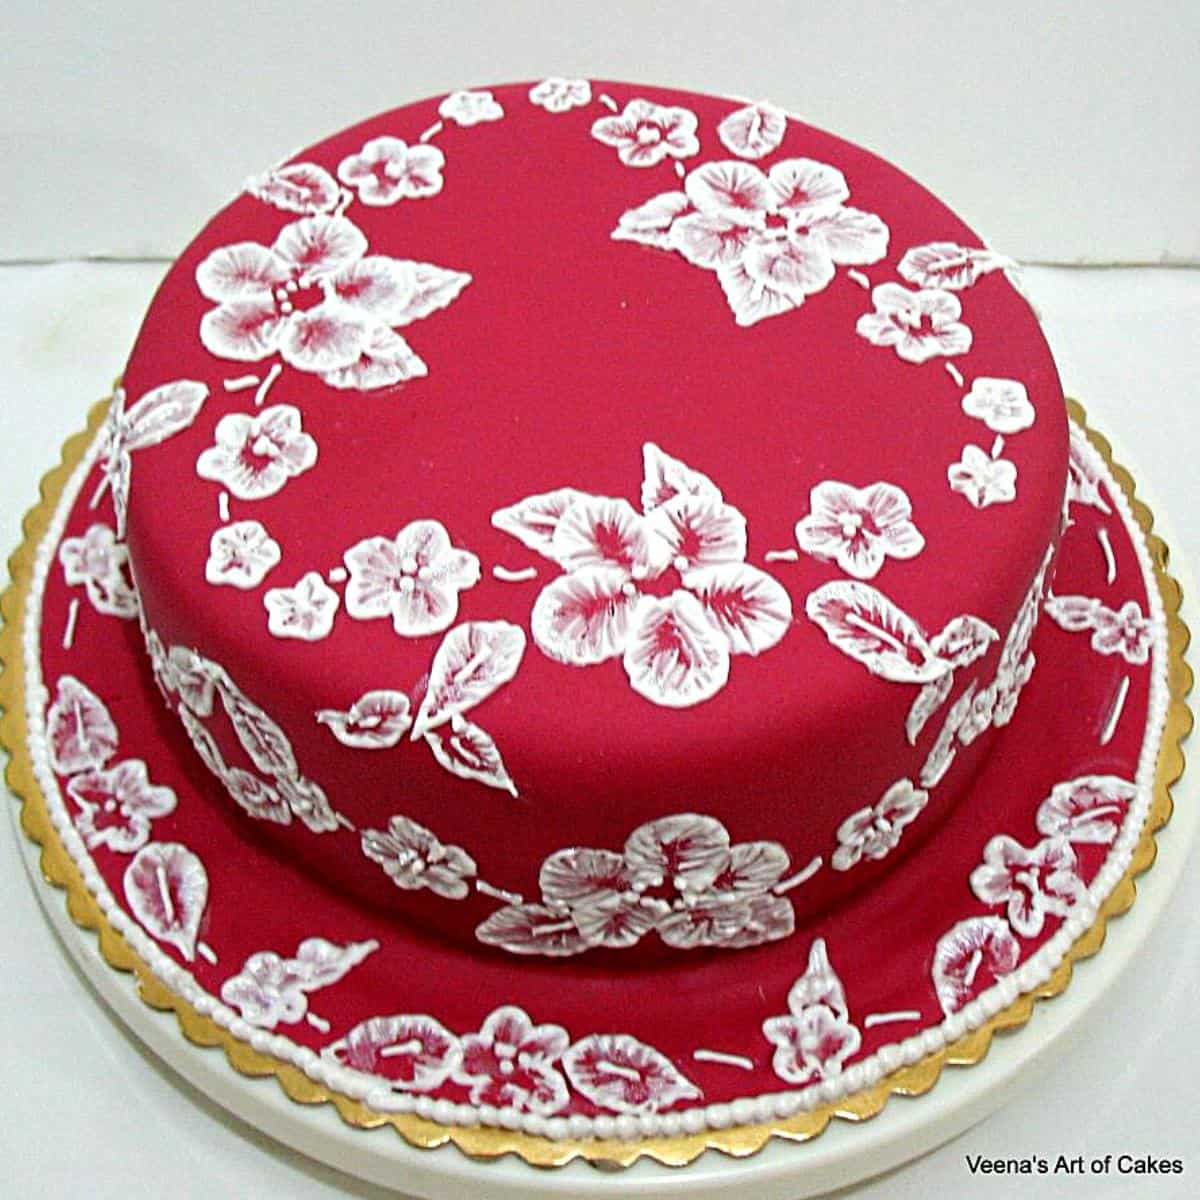 A red velvet cake with lace piping.